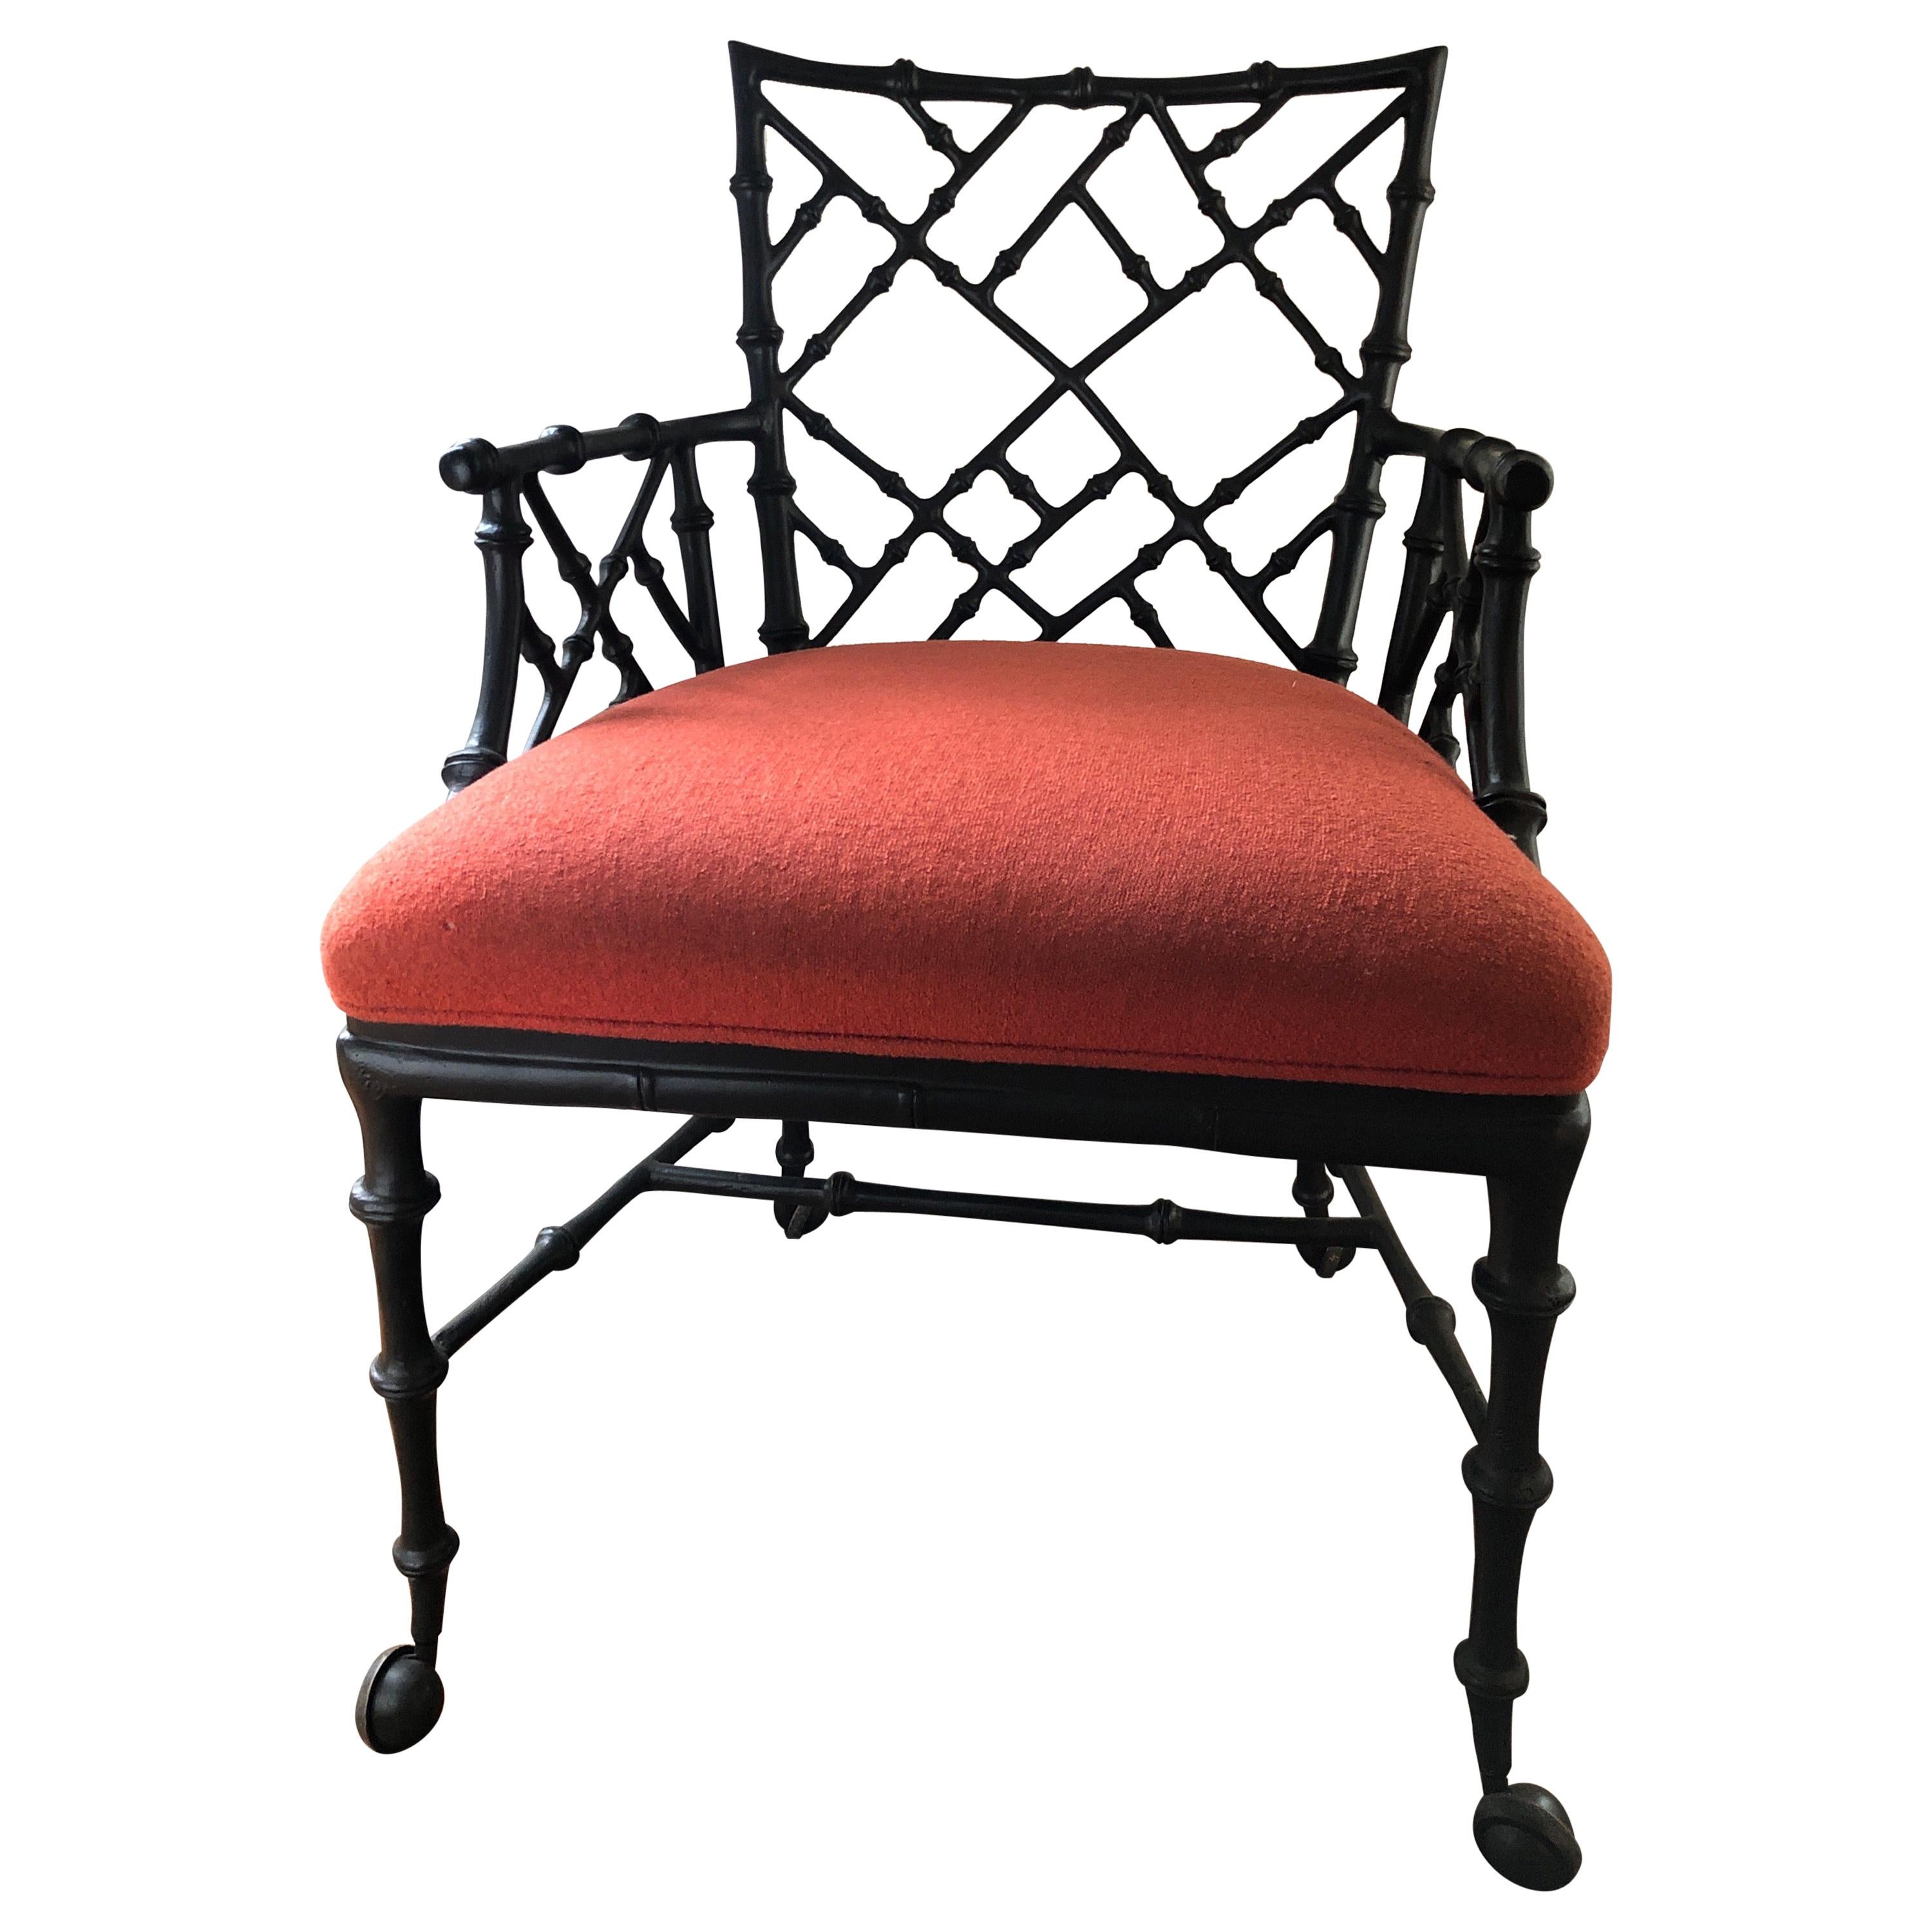 Phyllis Morris Faux Bamboo Ebony Iron Armchair on Casters